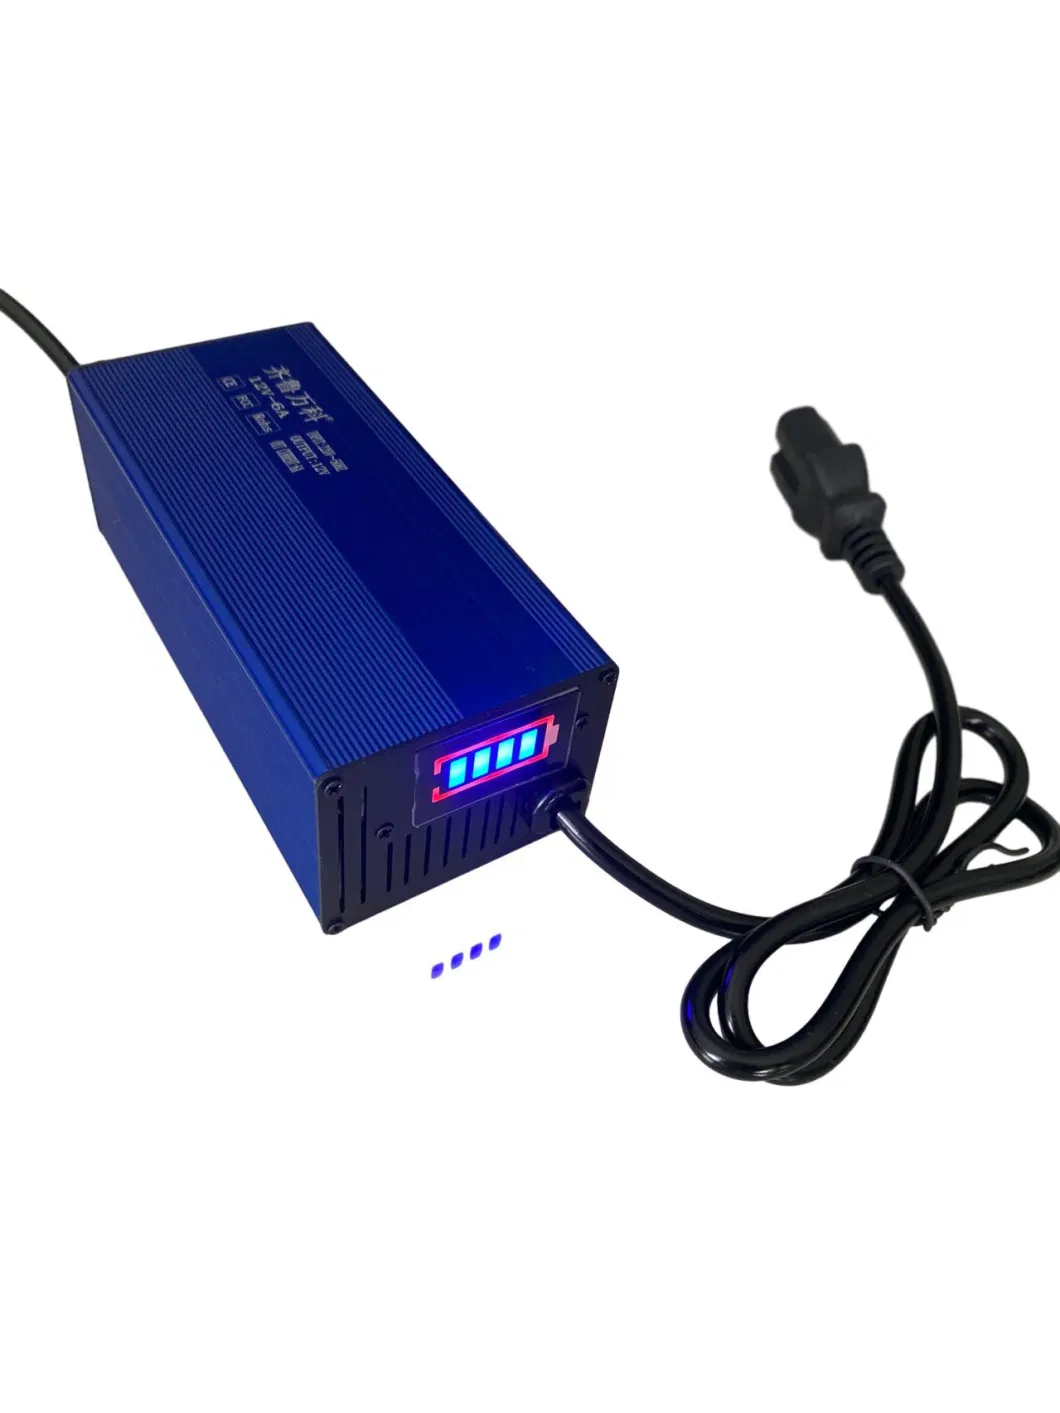 4.2V 8.4V 12.6V 16.8V 21V 1A 2A 3A 4A Lithium Li-ion Battery Charger 18650 Intelligent Automatic Battery Charger